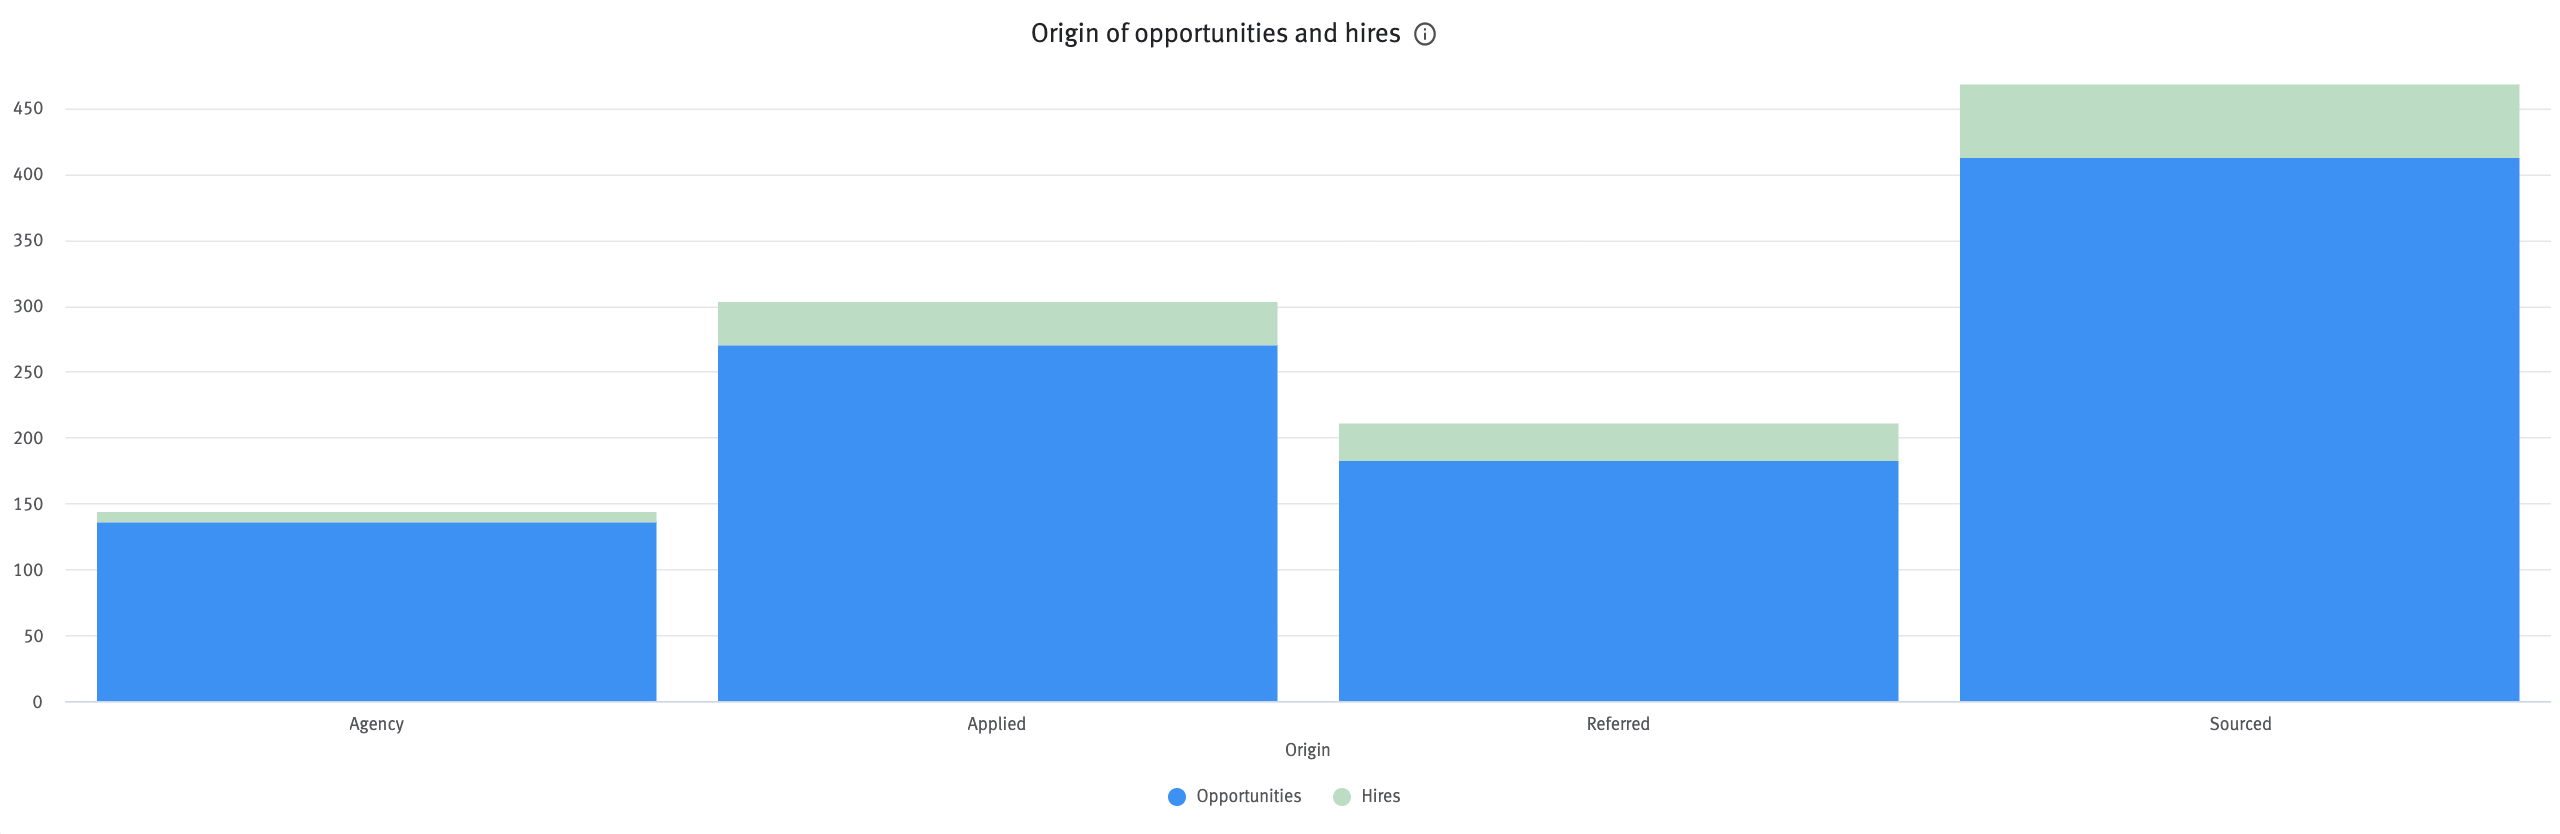 Origin of opportunities and hires chart